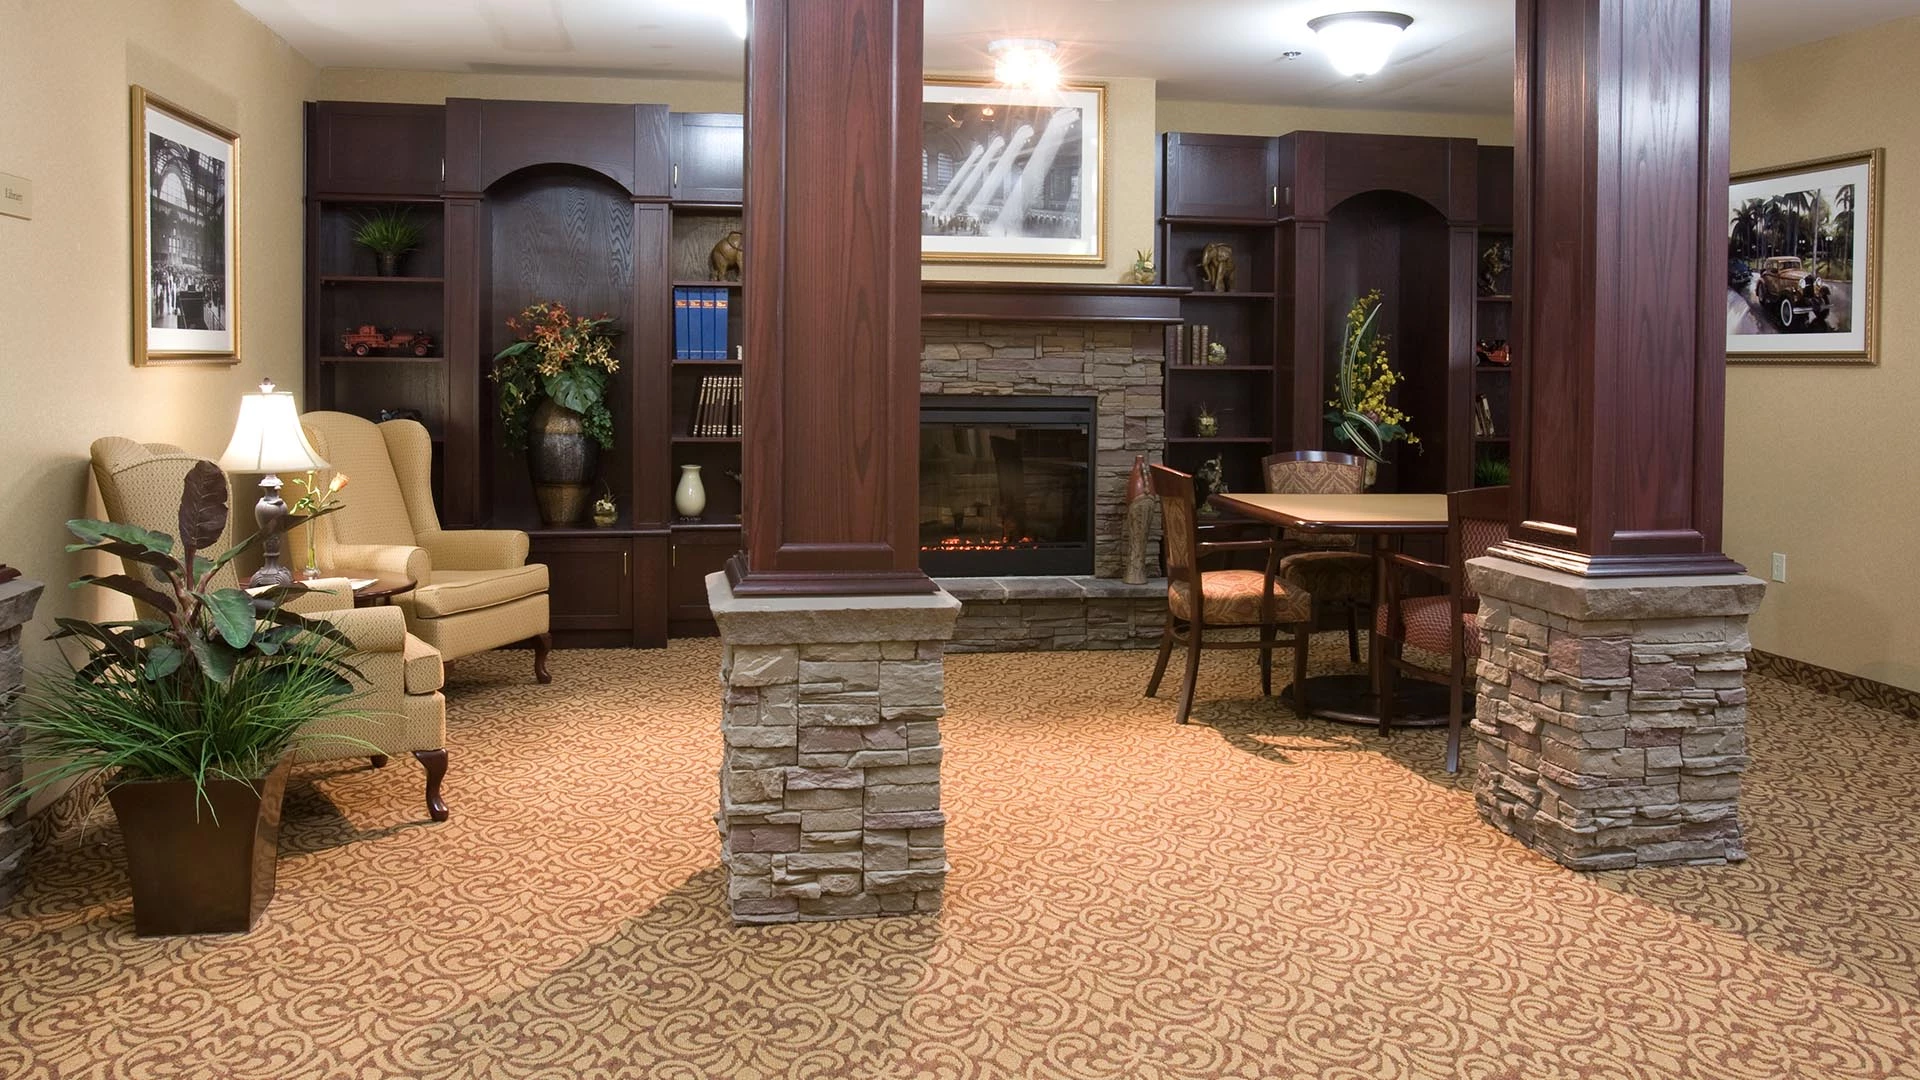 Peaceful library with fireplace at Summerwood village retirement home